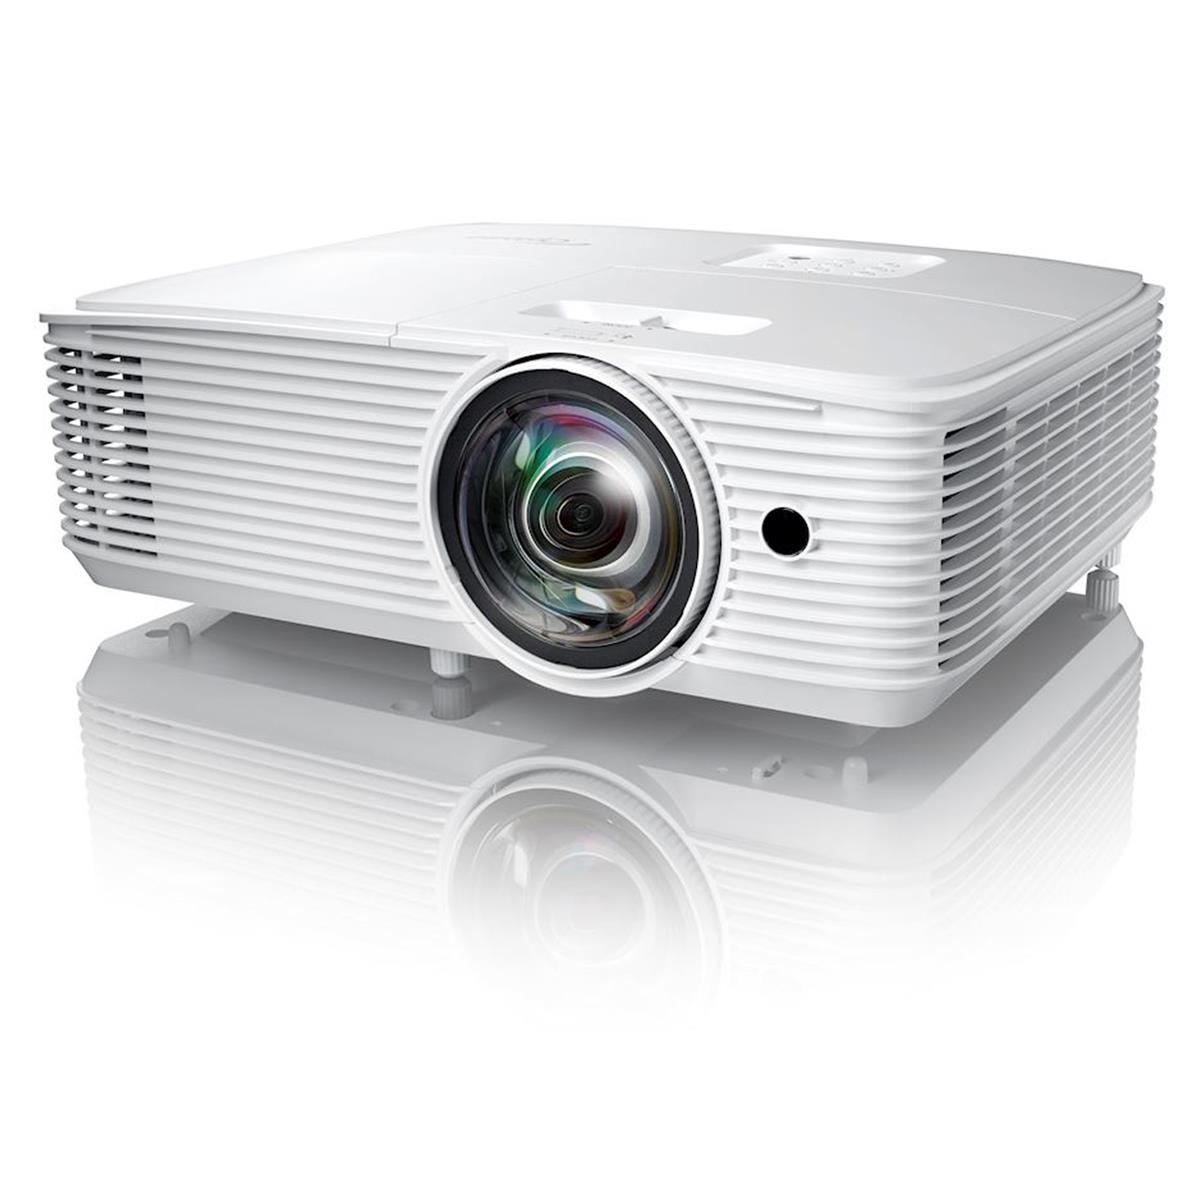 Full HD Short Throw DLP Home Theater and Gaming Projector - Optoma GT1080HDRX